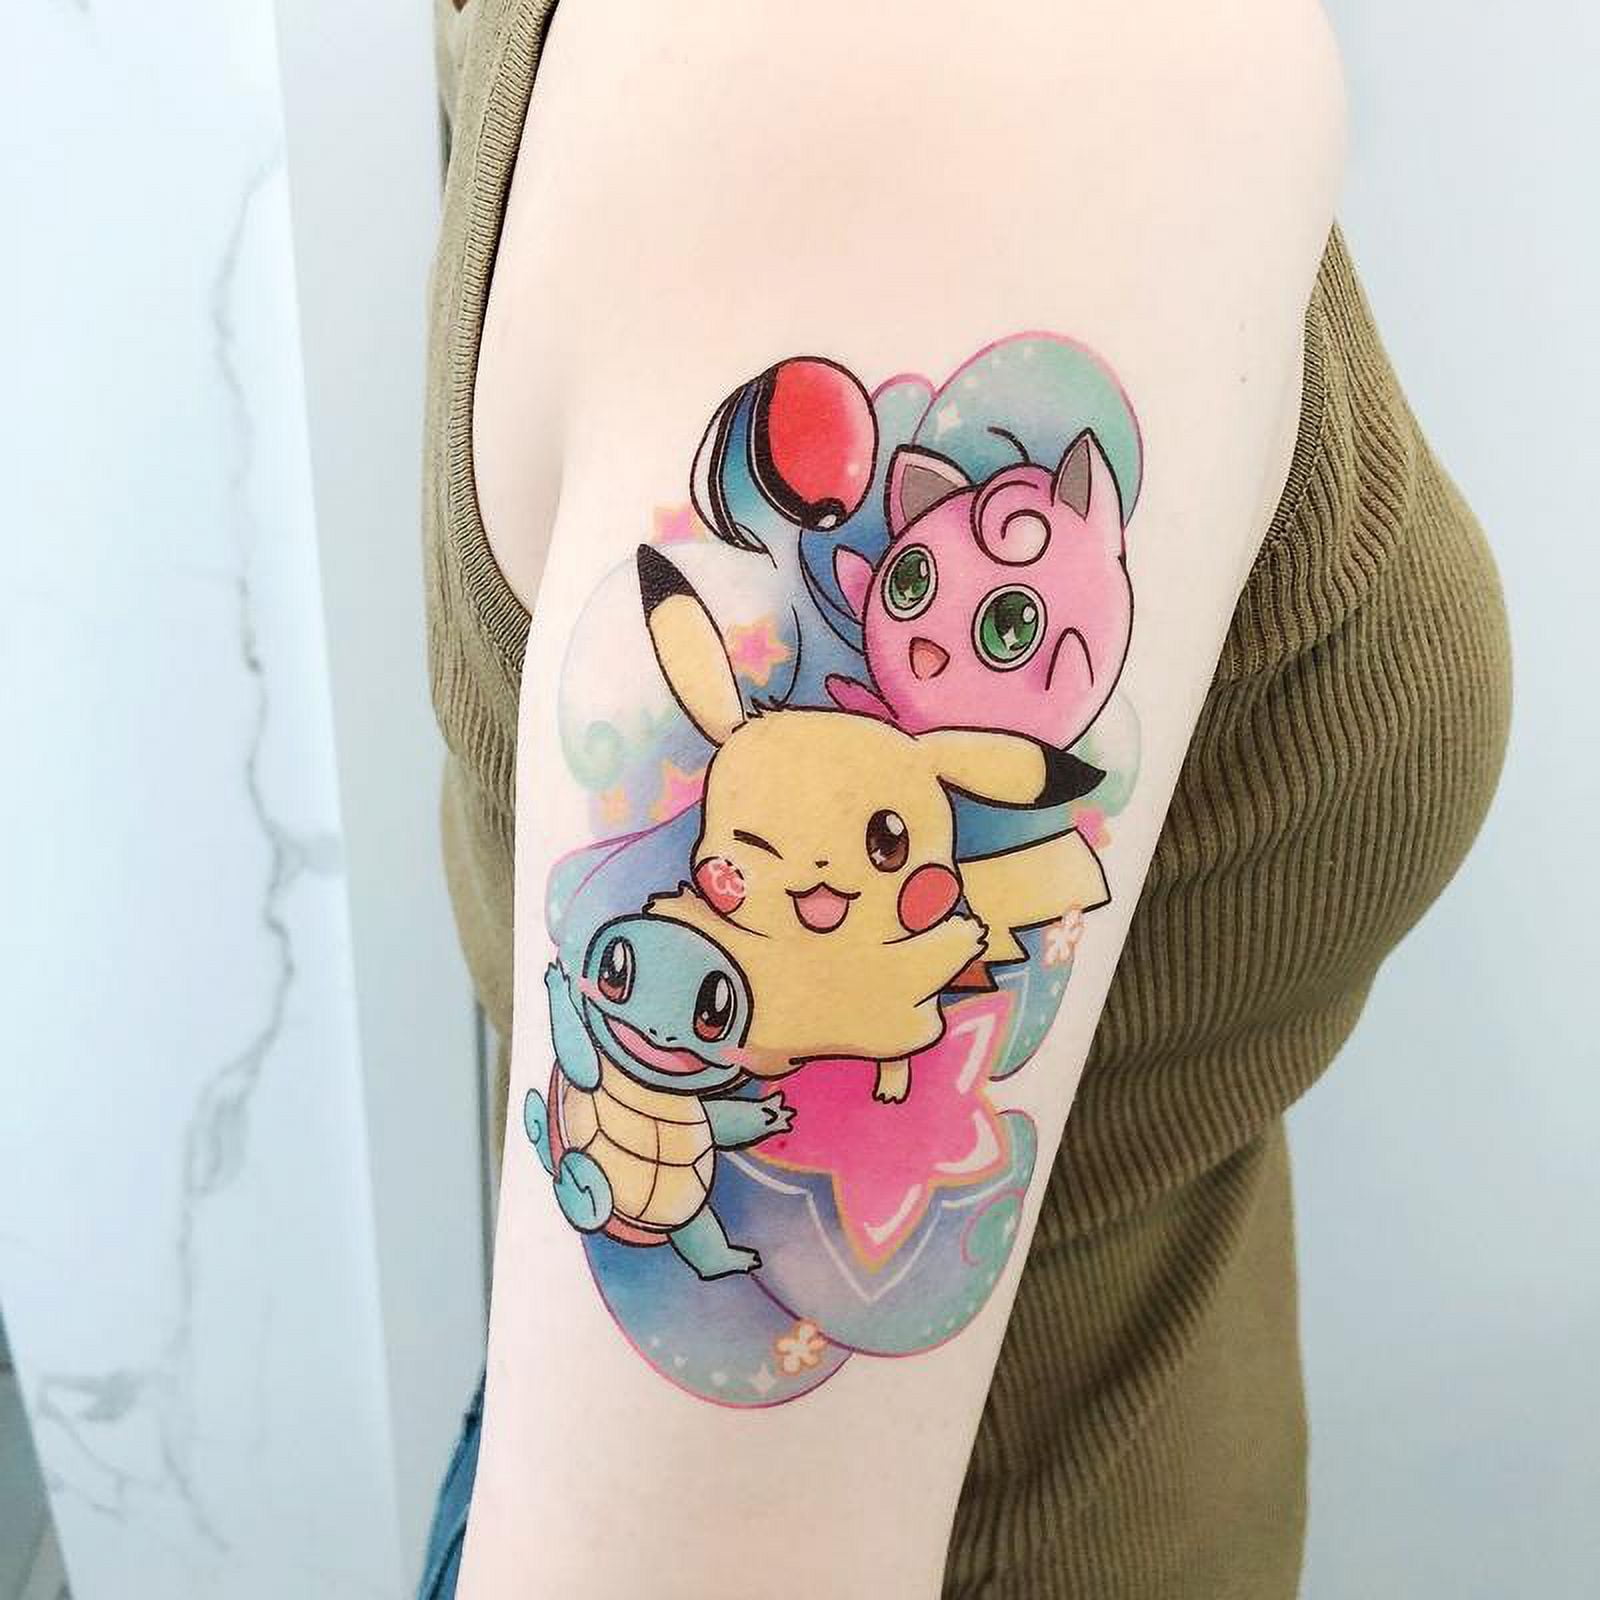 Pokémon: 10 Fire-Type Tattoos For Dedicated Trainers